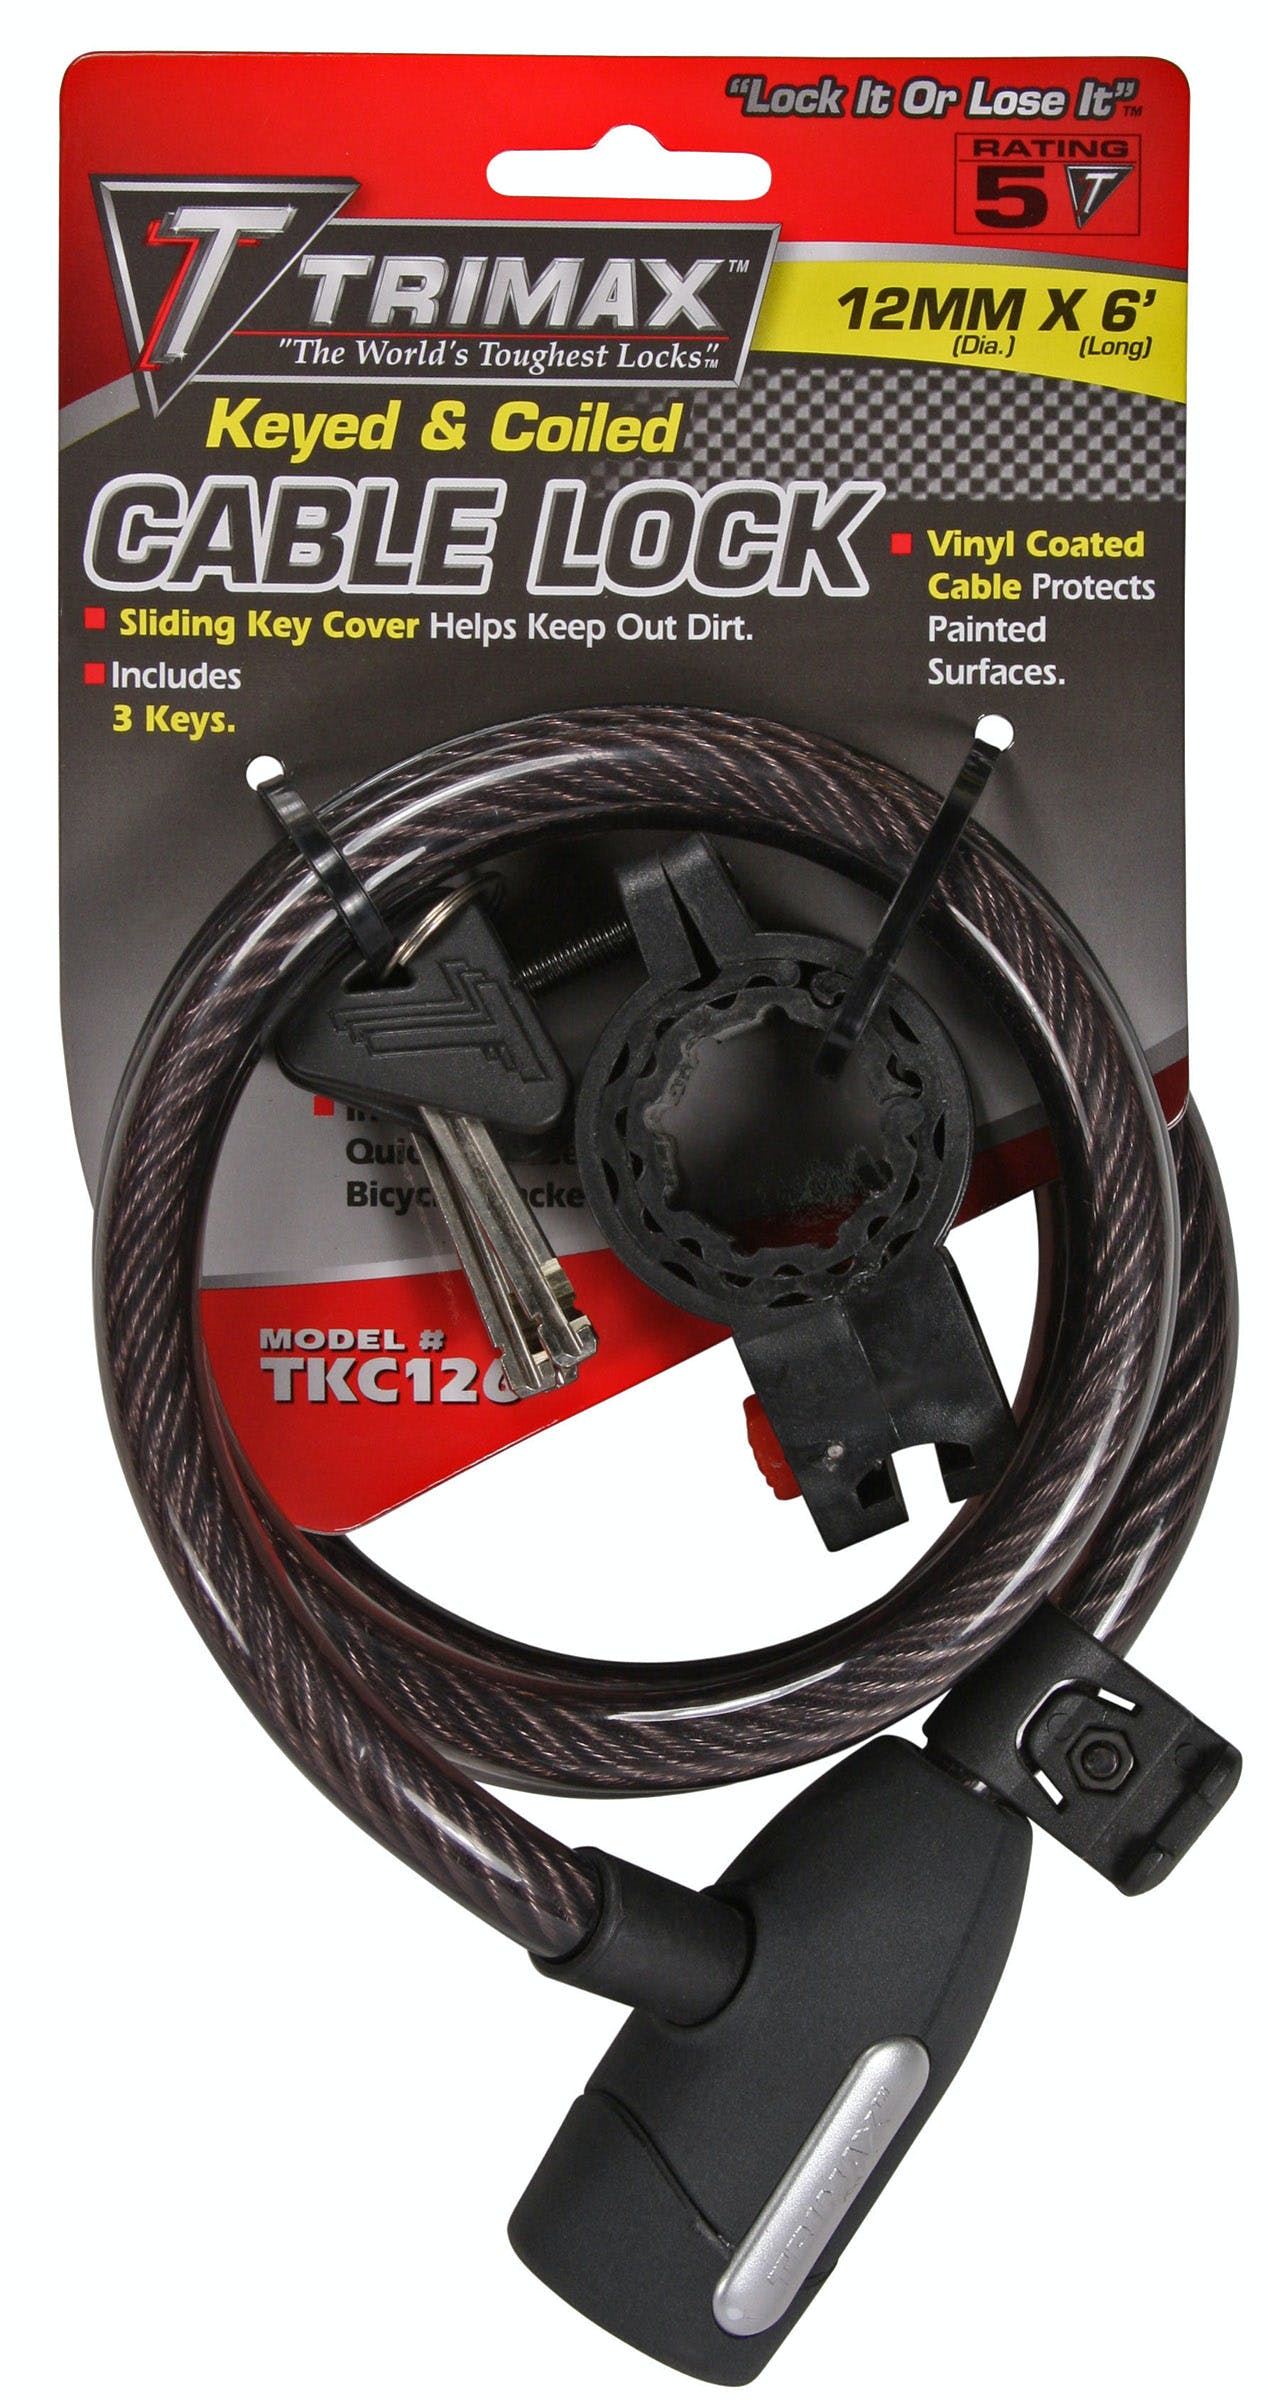 TRIMAX TKC126 High Security Cable Lock with Bracket - Coiled 72 inch X 12mm